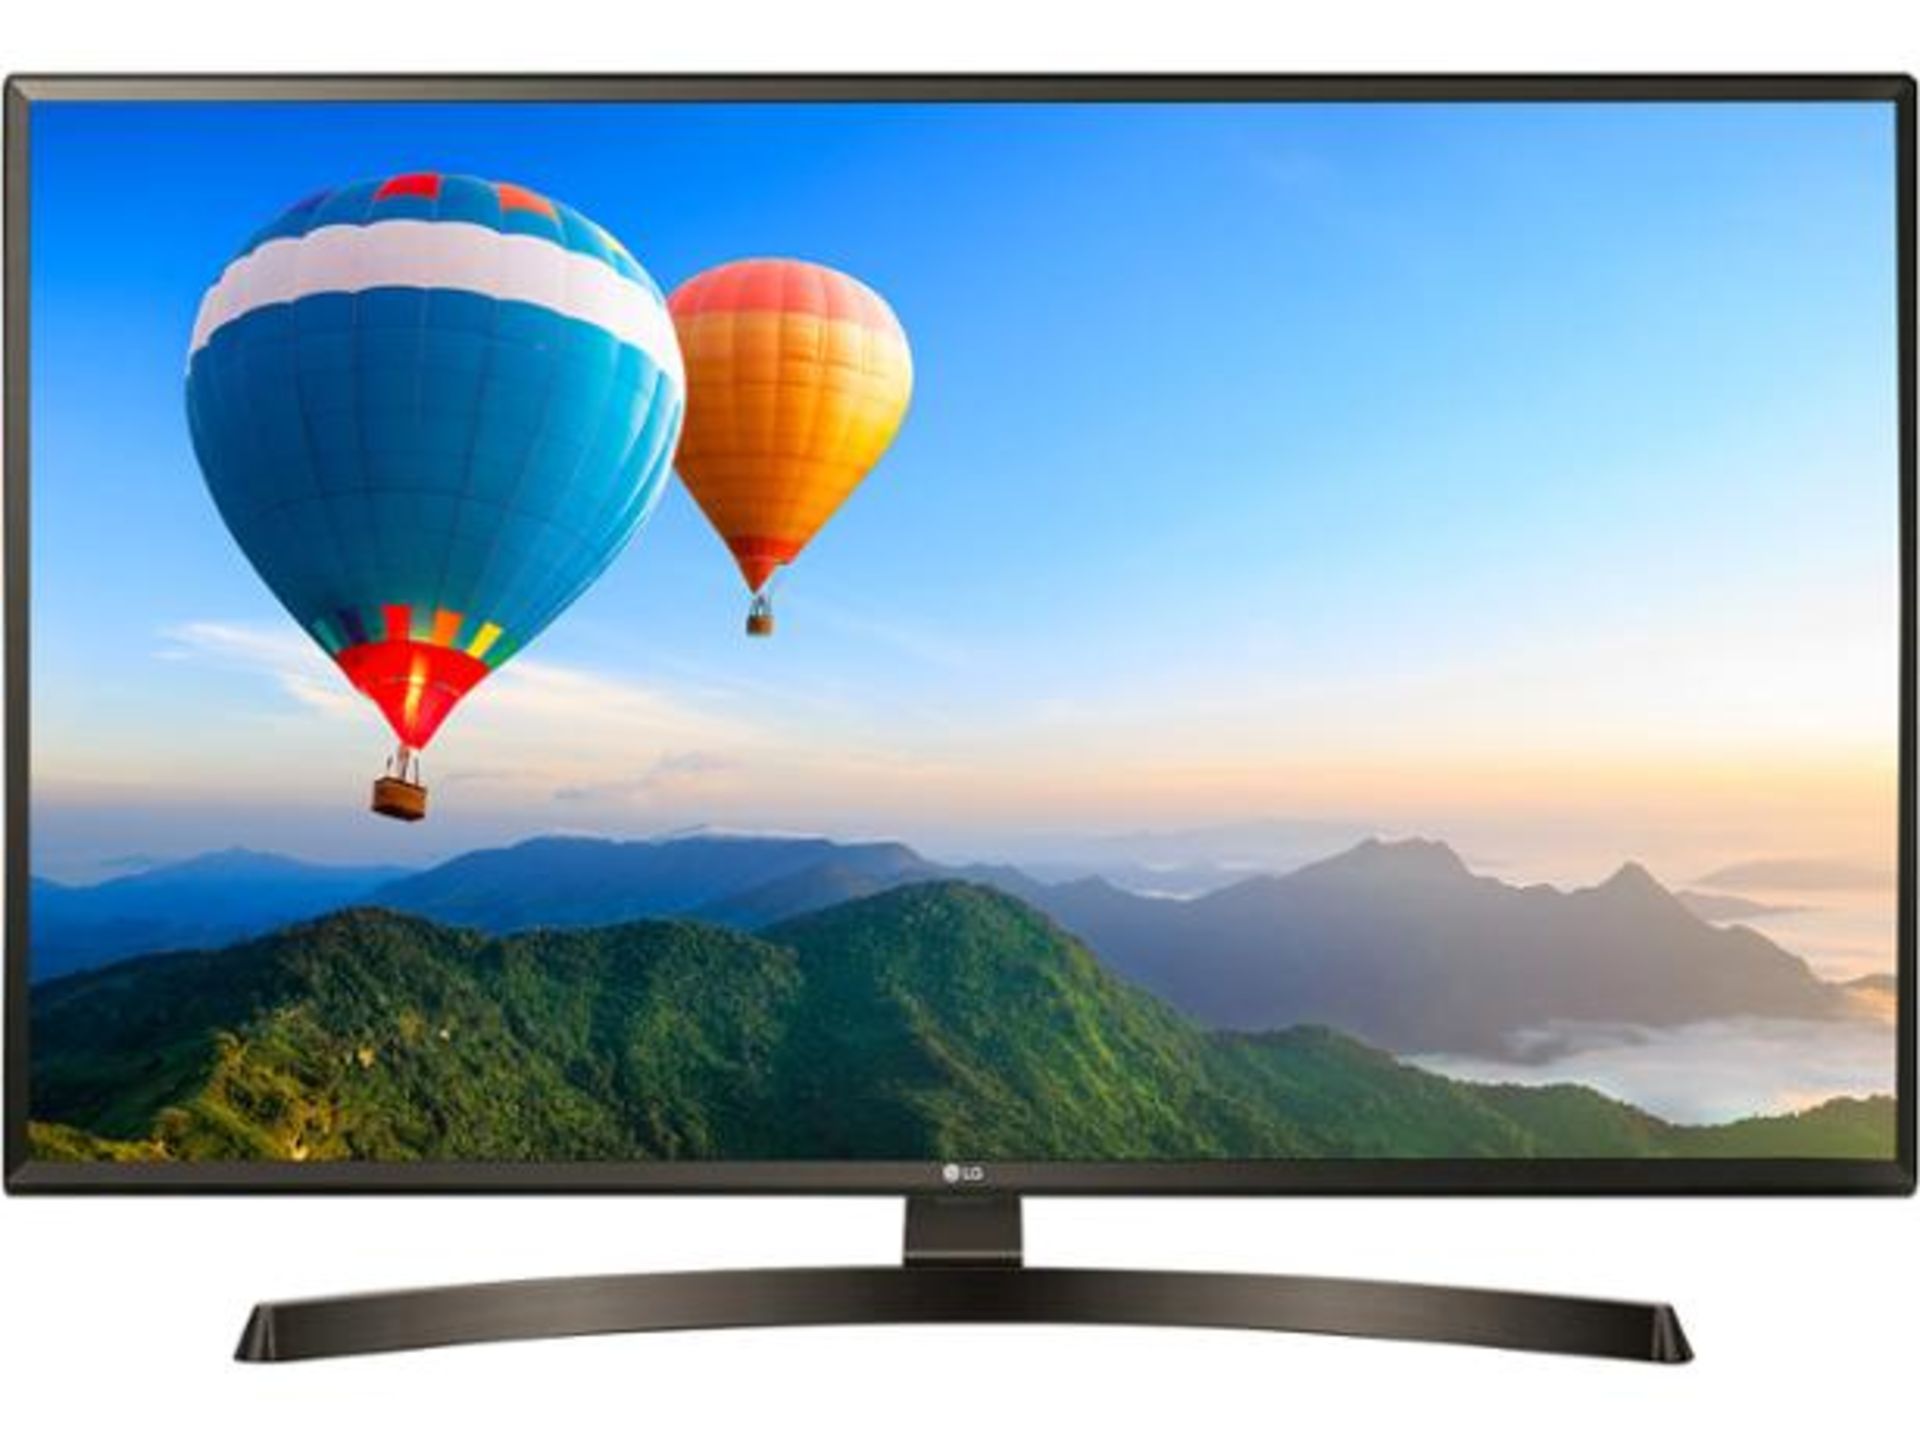 V Grade A LG 49 Inch ACTIVE HDR 4K ULTRA HD LED SMART TV WITH FREEVIEW HD & WEBOS 4.0 & WIFI - AI - Image 2 of 2